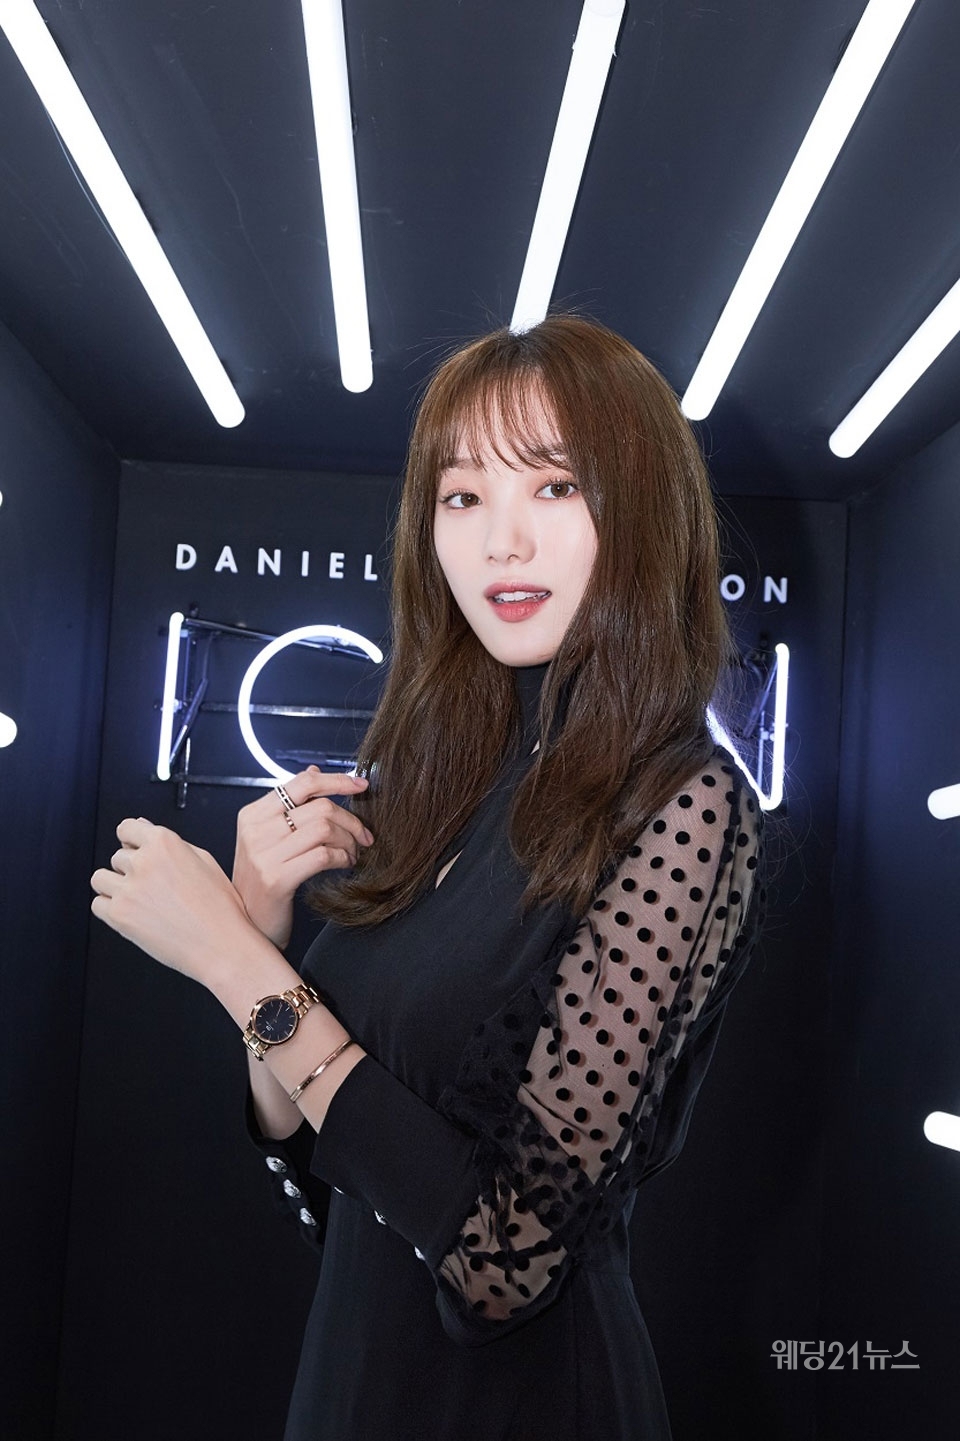 Actress Lee Sung-kyung, one of the fashion icons, took the spot on the 17th (Thursday) in search of Daniel Wellington Samcheong Flagship Store in commemoration of the successful launch of Daniel Wellington (DANIEL WELLINGTON) Iconiq Link (ICONIC LINK) collection.Lee Sung-kyung, who is also active as a global icon of Daniel Wellington, completed the fascinating and sophisticated styling by matching the Iconiq link (ICONIC LINK) watch to the dress with modern incision design. The Iconiq link collection worn by Lee Sung-kyung is the first metal to be presented at Daniel Wellington It is a link watch with a brand-specific modern The Classic and elegant silhouette.In addition, he added The Classical yet elegant charm to Daniel Wellingtons Bracelet and Ring products.Lee Sung-kyung not only celebrated the successful launch of the Iconiq Link (ICONIC LINK) collection, but also participated in mini-talk concerts with Daniel Wellington influencers afterward, which warmed the scene atmosphere. Lee Sung-kyung has been talking about the background of Daniel Wellingtons global icon, the behind-the-scenes story of the shooting scene, and the meaning of the icon he thinks. Meanwhile, Lee Sung-kyung is about to appear on SBS new drama Romantic Doctor Kim Sabu Season 2.